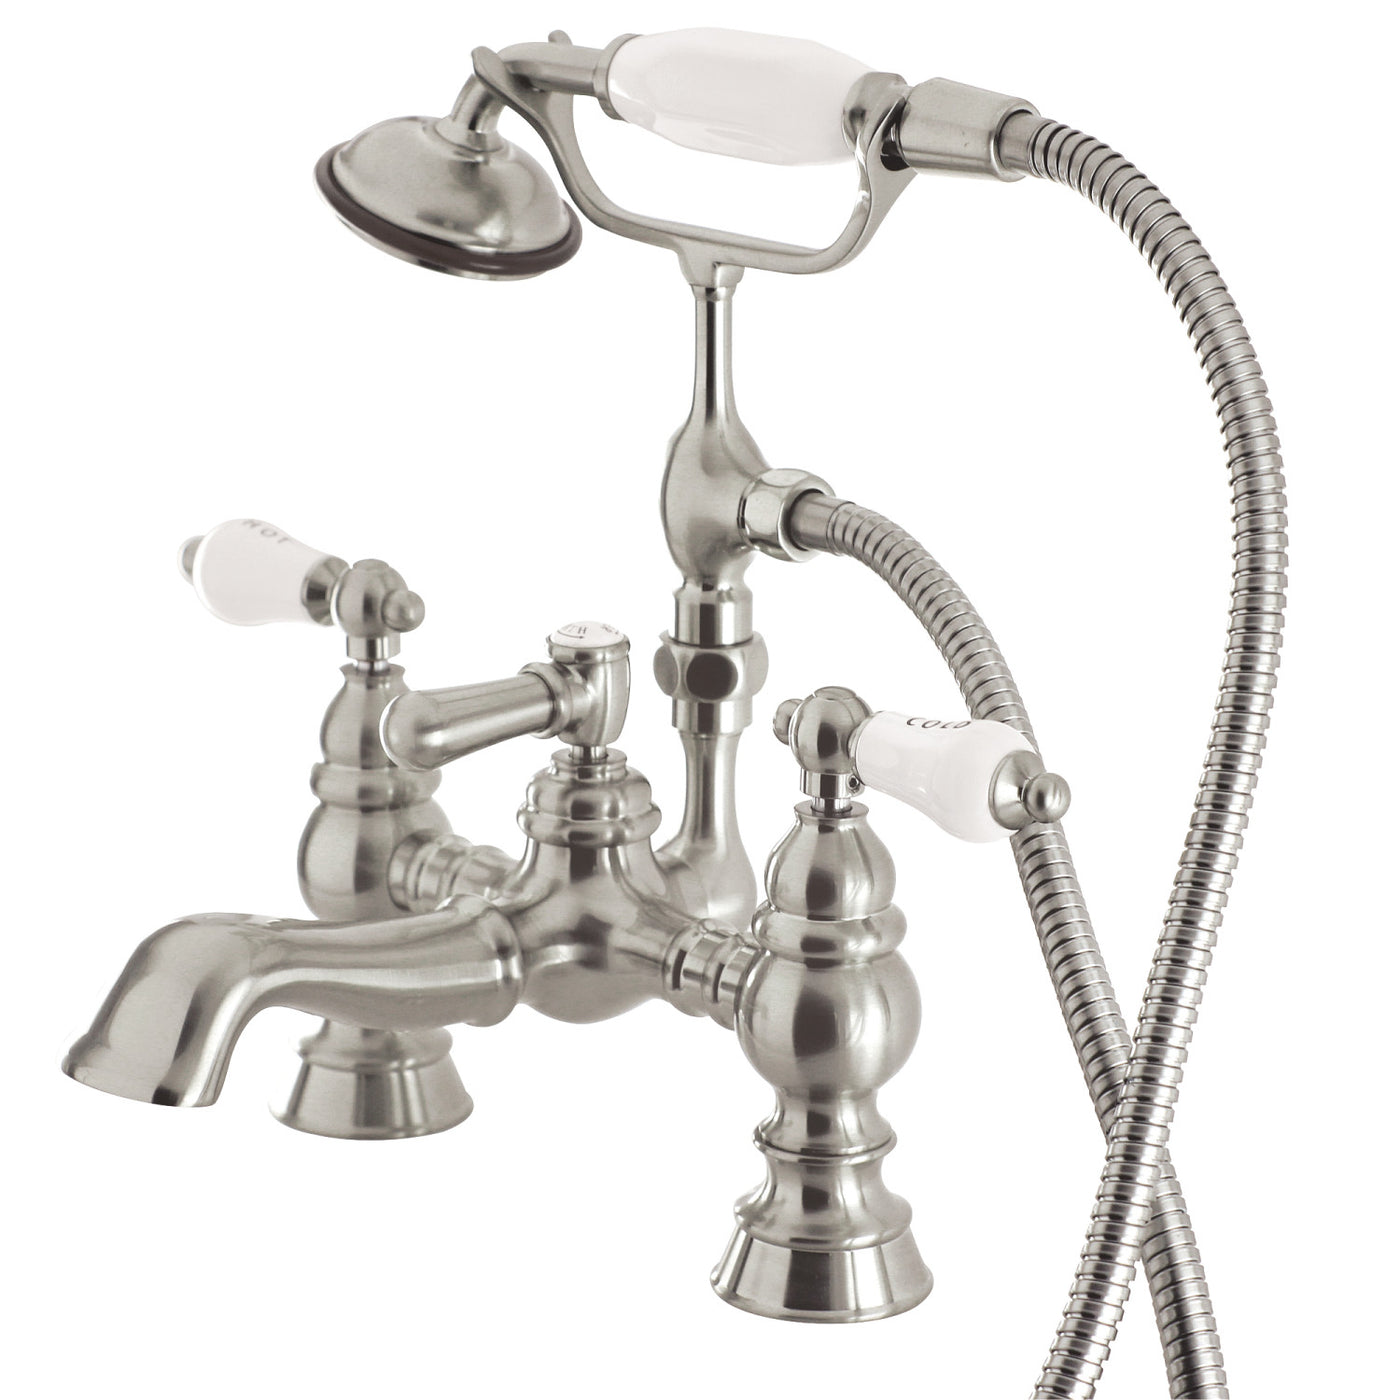 Elements of Design DT11528PL 7-Inch Deck Mount Tub Faucet with Hand Shower, Brushed Nickel